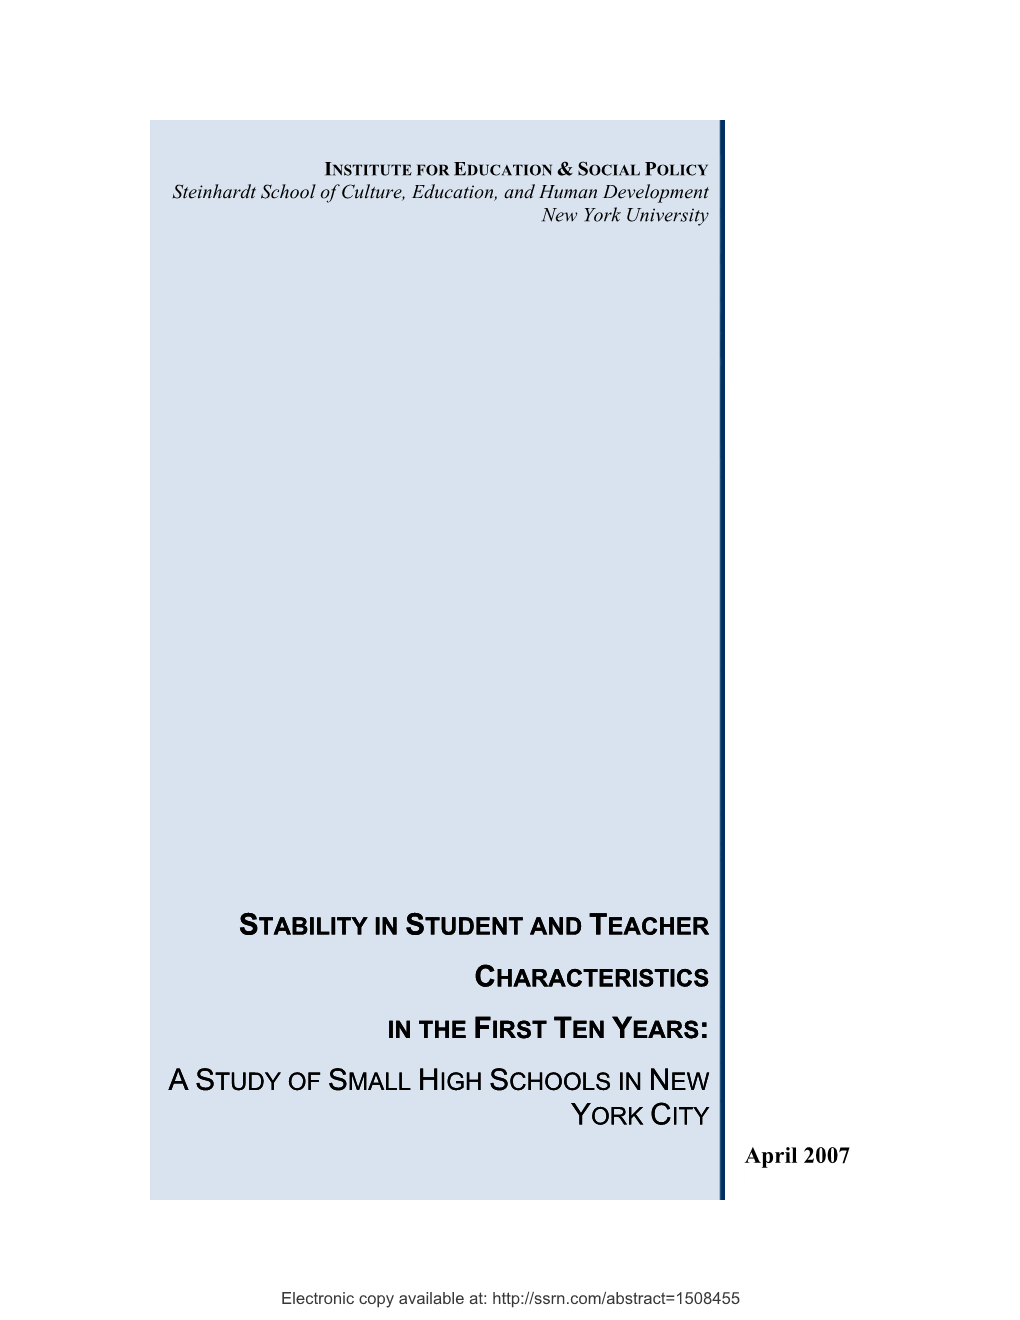 Stability in Student and Teacher Characteristics for Any Significant Amount of Time Across Their First Ten Years